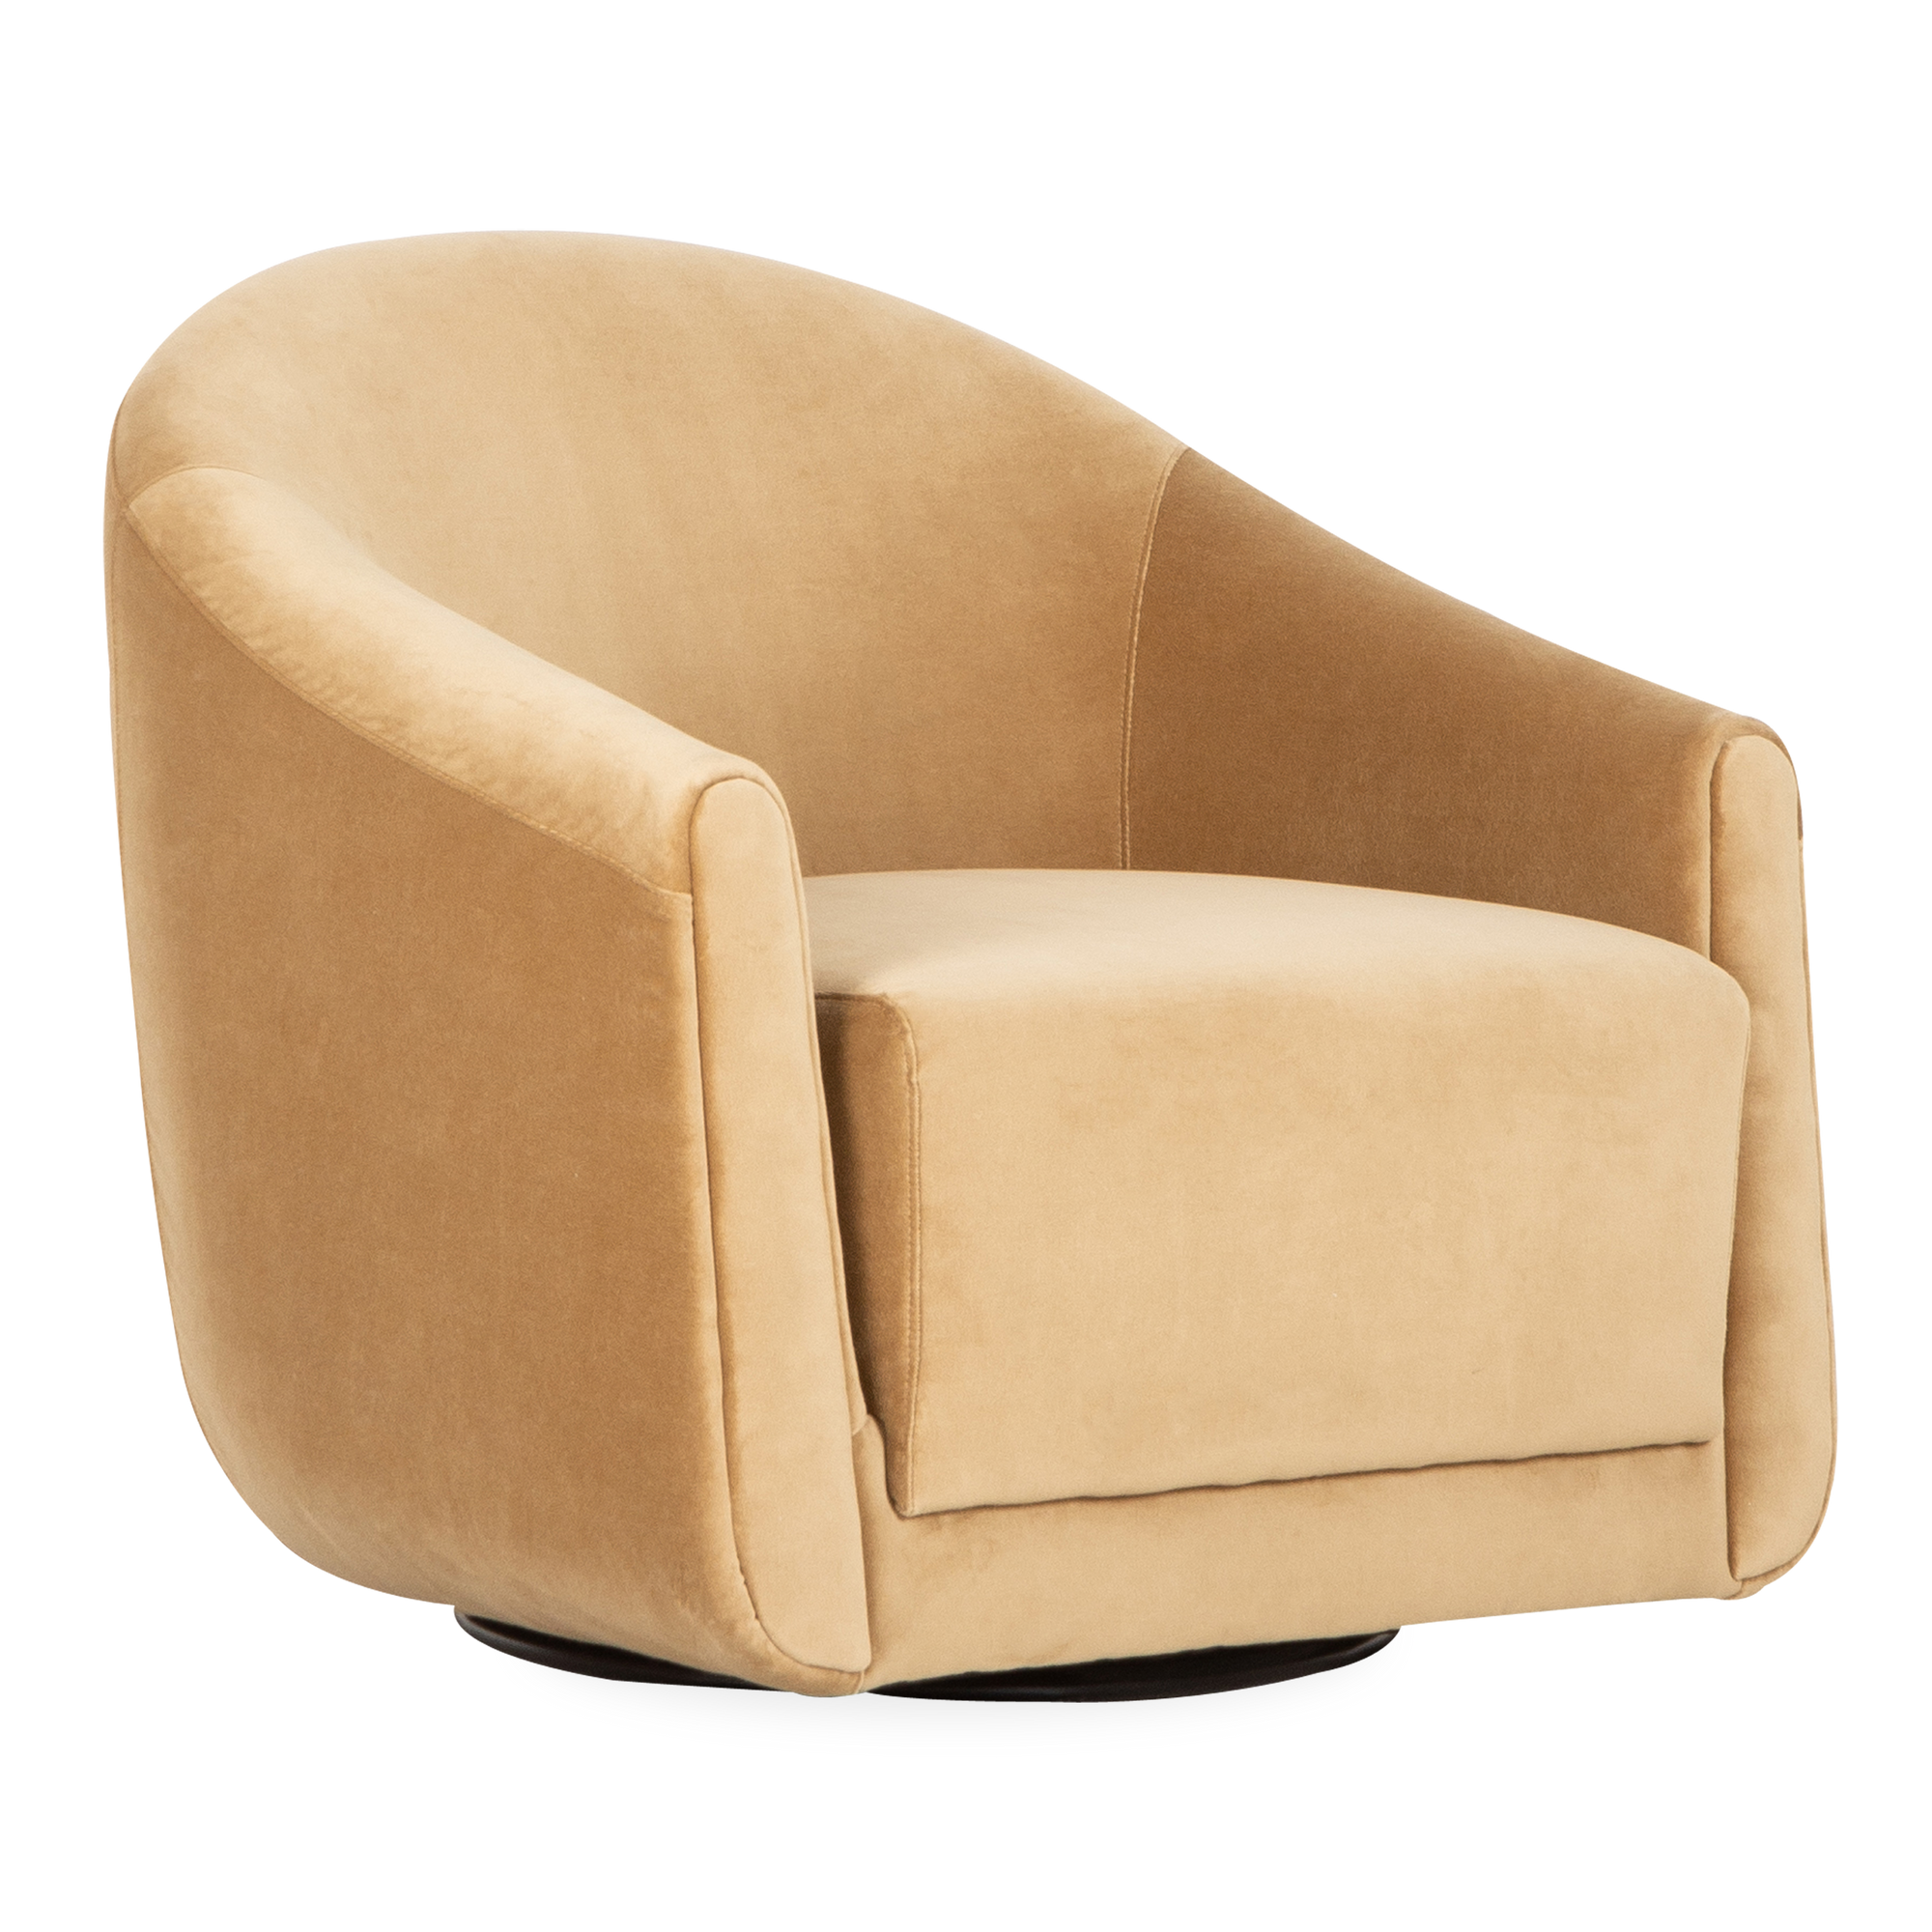 With its slim frame and oversized seat, the Shore Swivel Chair offers a nuanced sophistication.